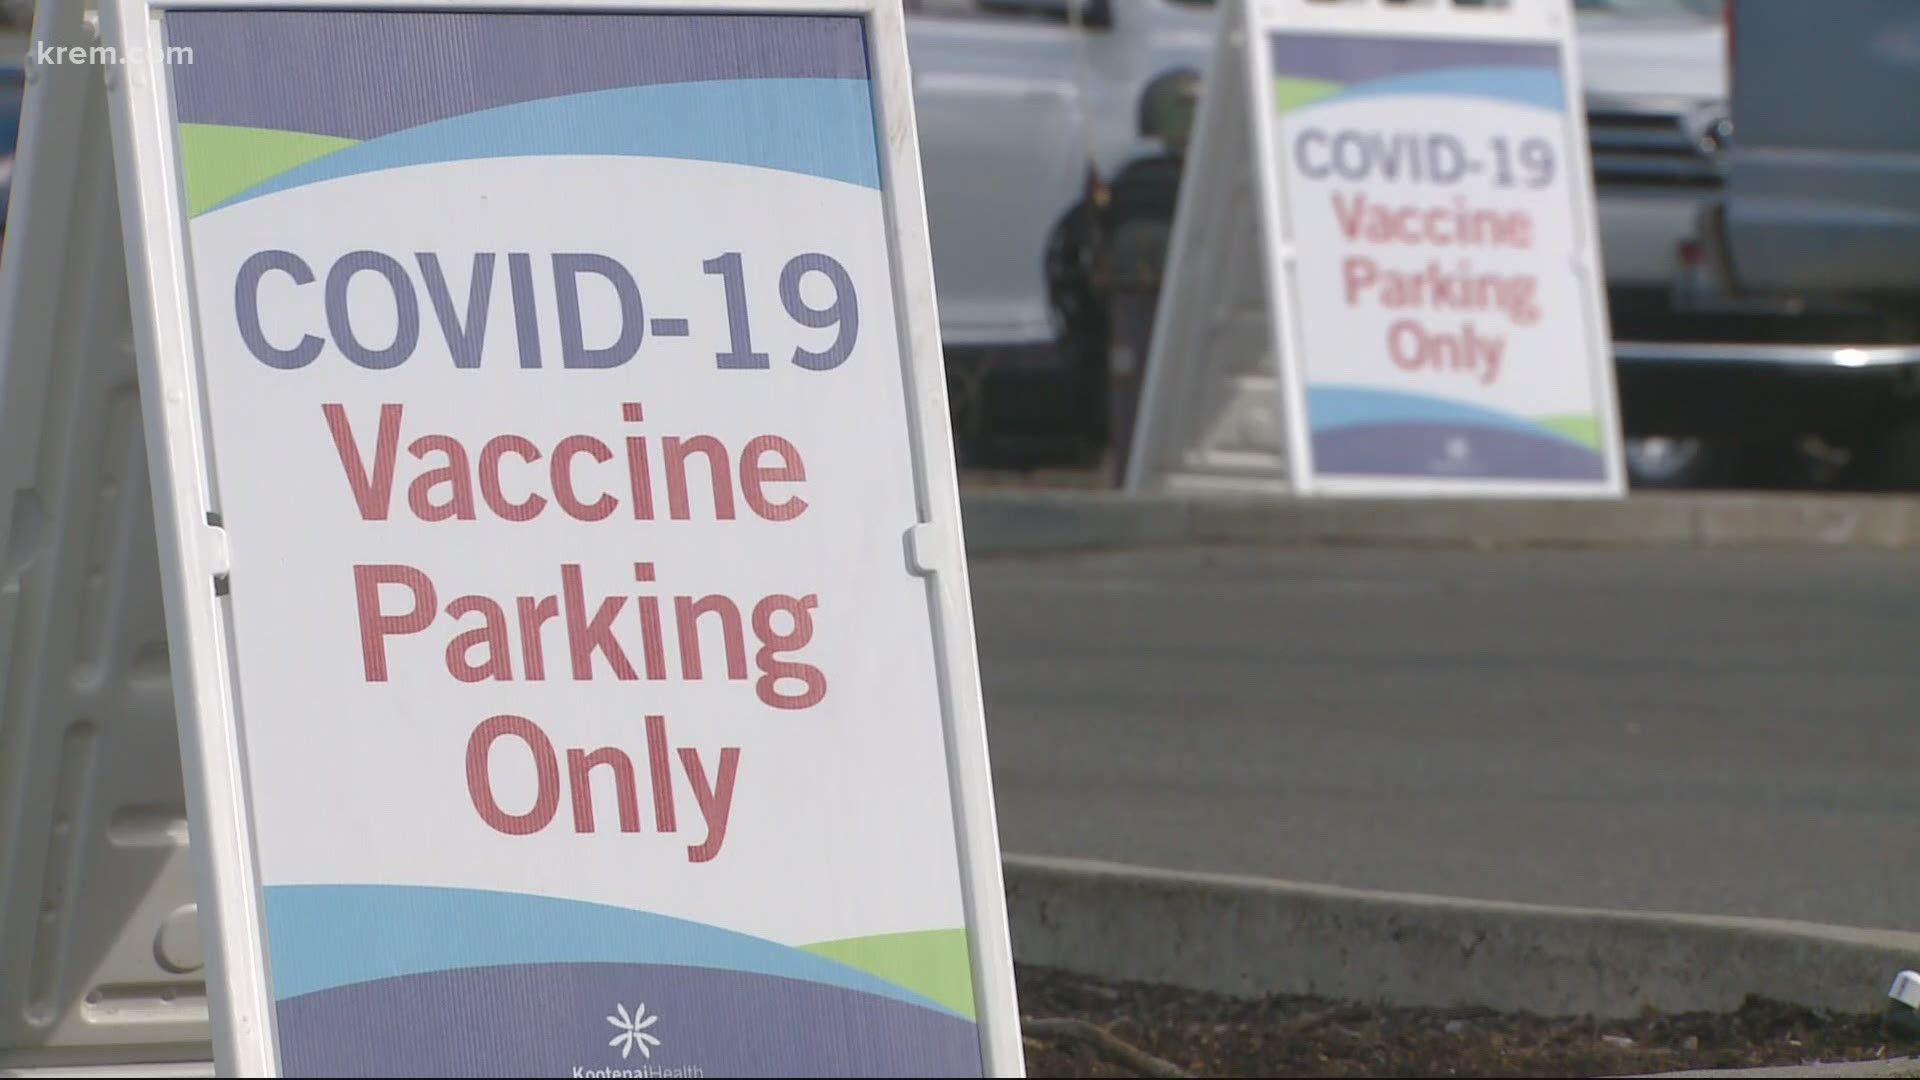 COVID-19 vaccine appointments are in short supply throughout Spokane and North Idaho. Here's what you need to know about when you could get one.